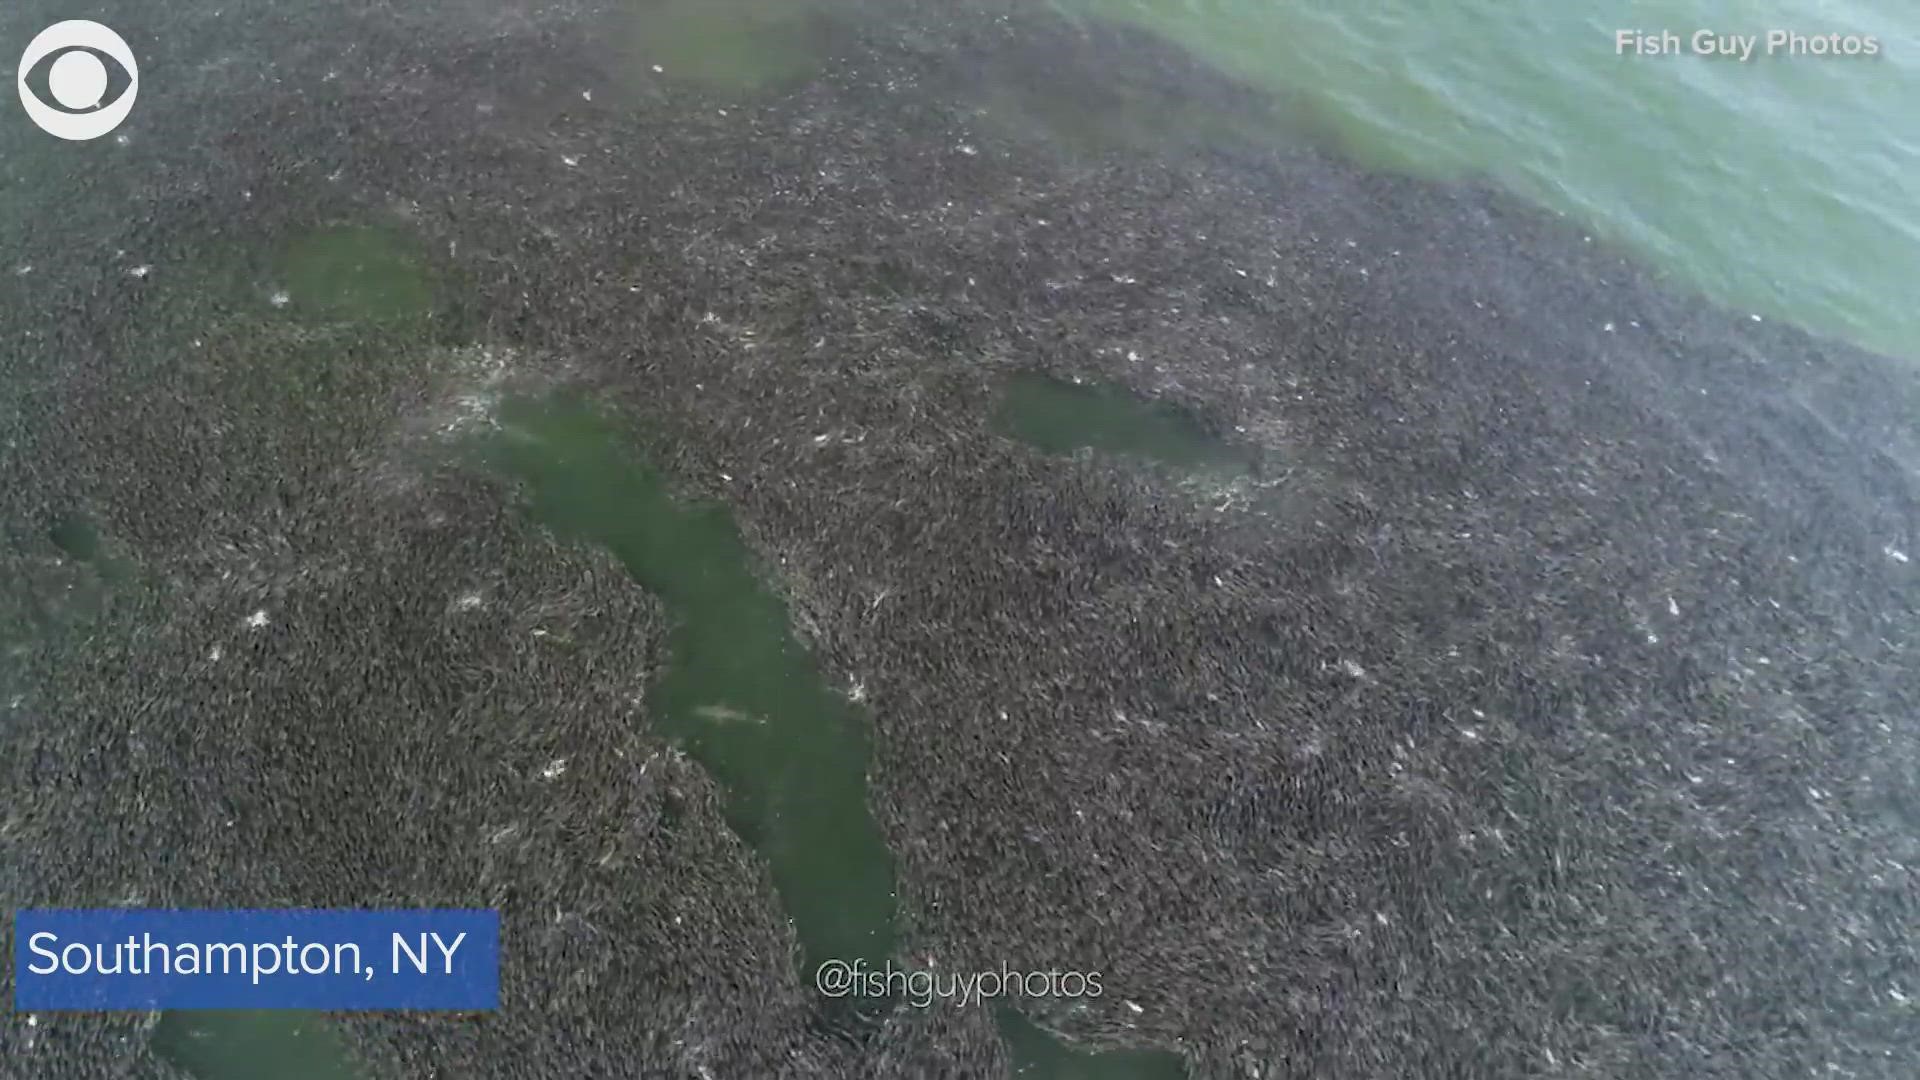 Sharks were caught on camera swimming through schools of fish in Southampton, NY on July 24.